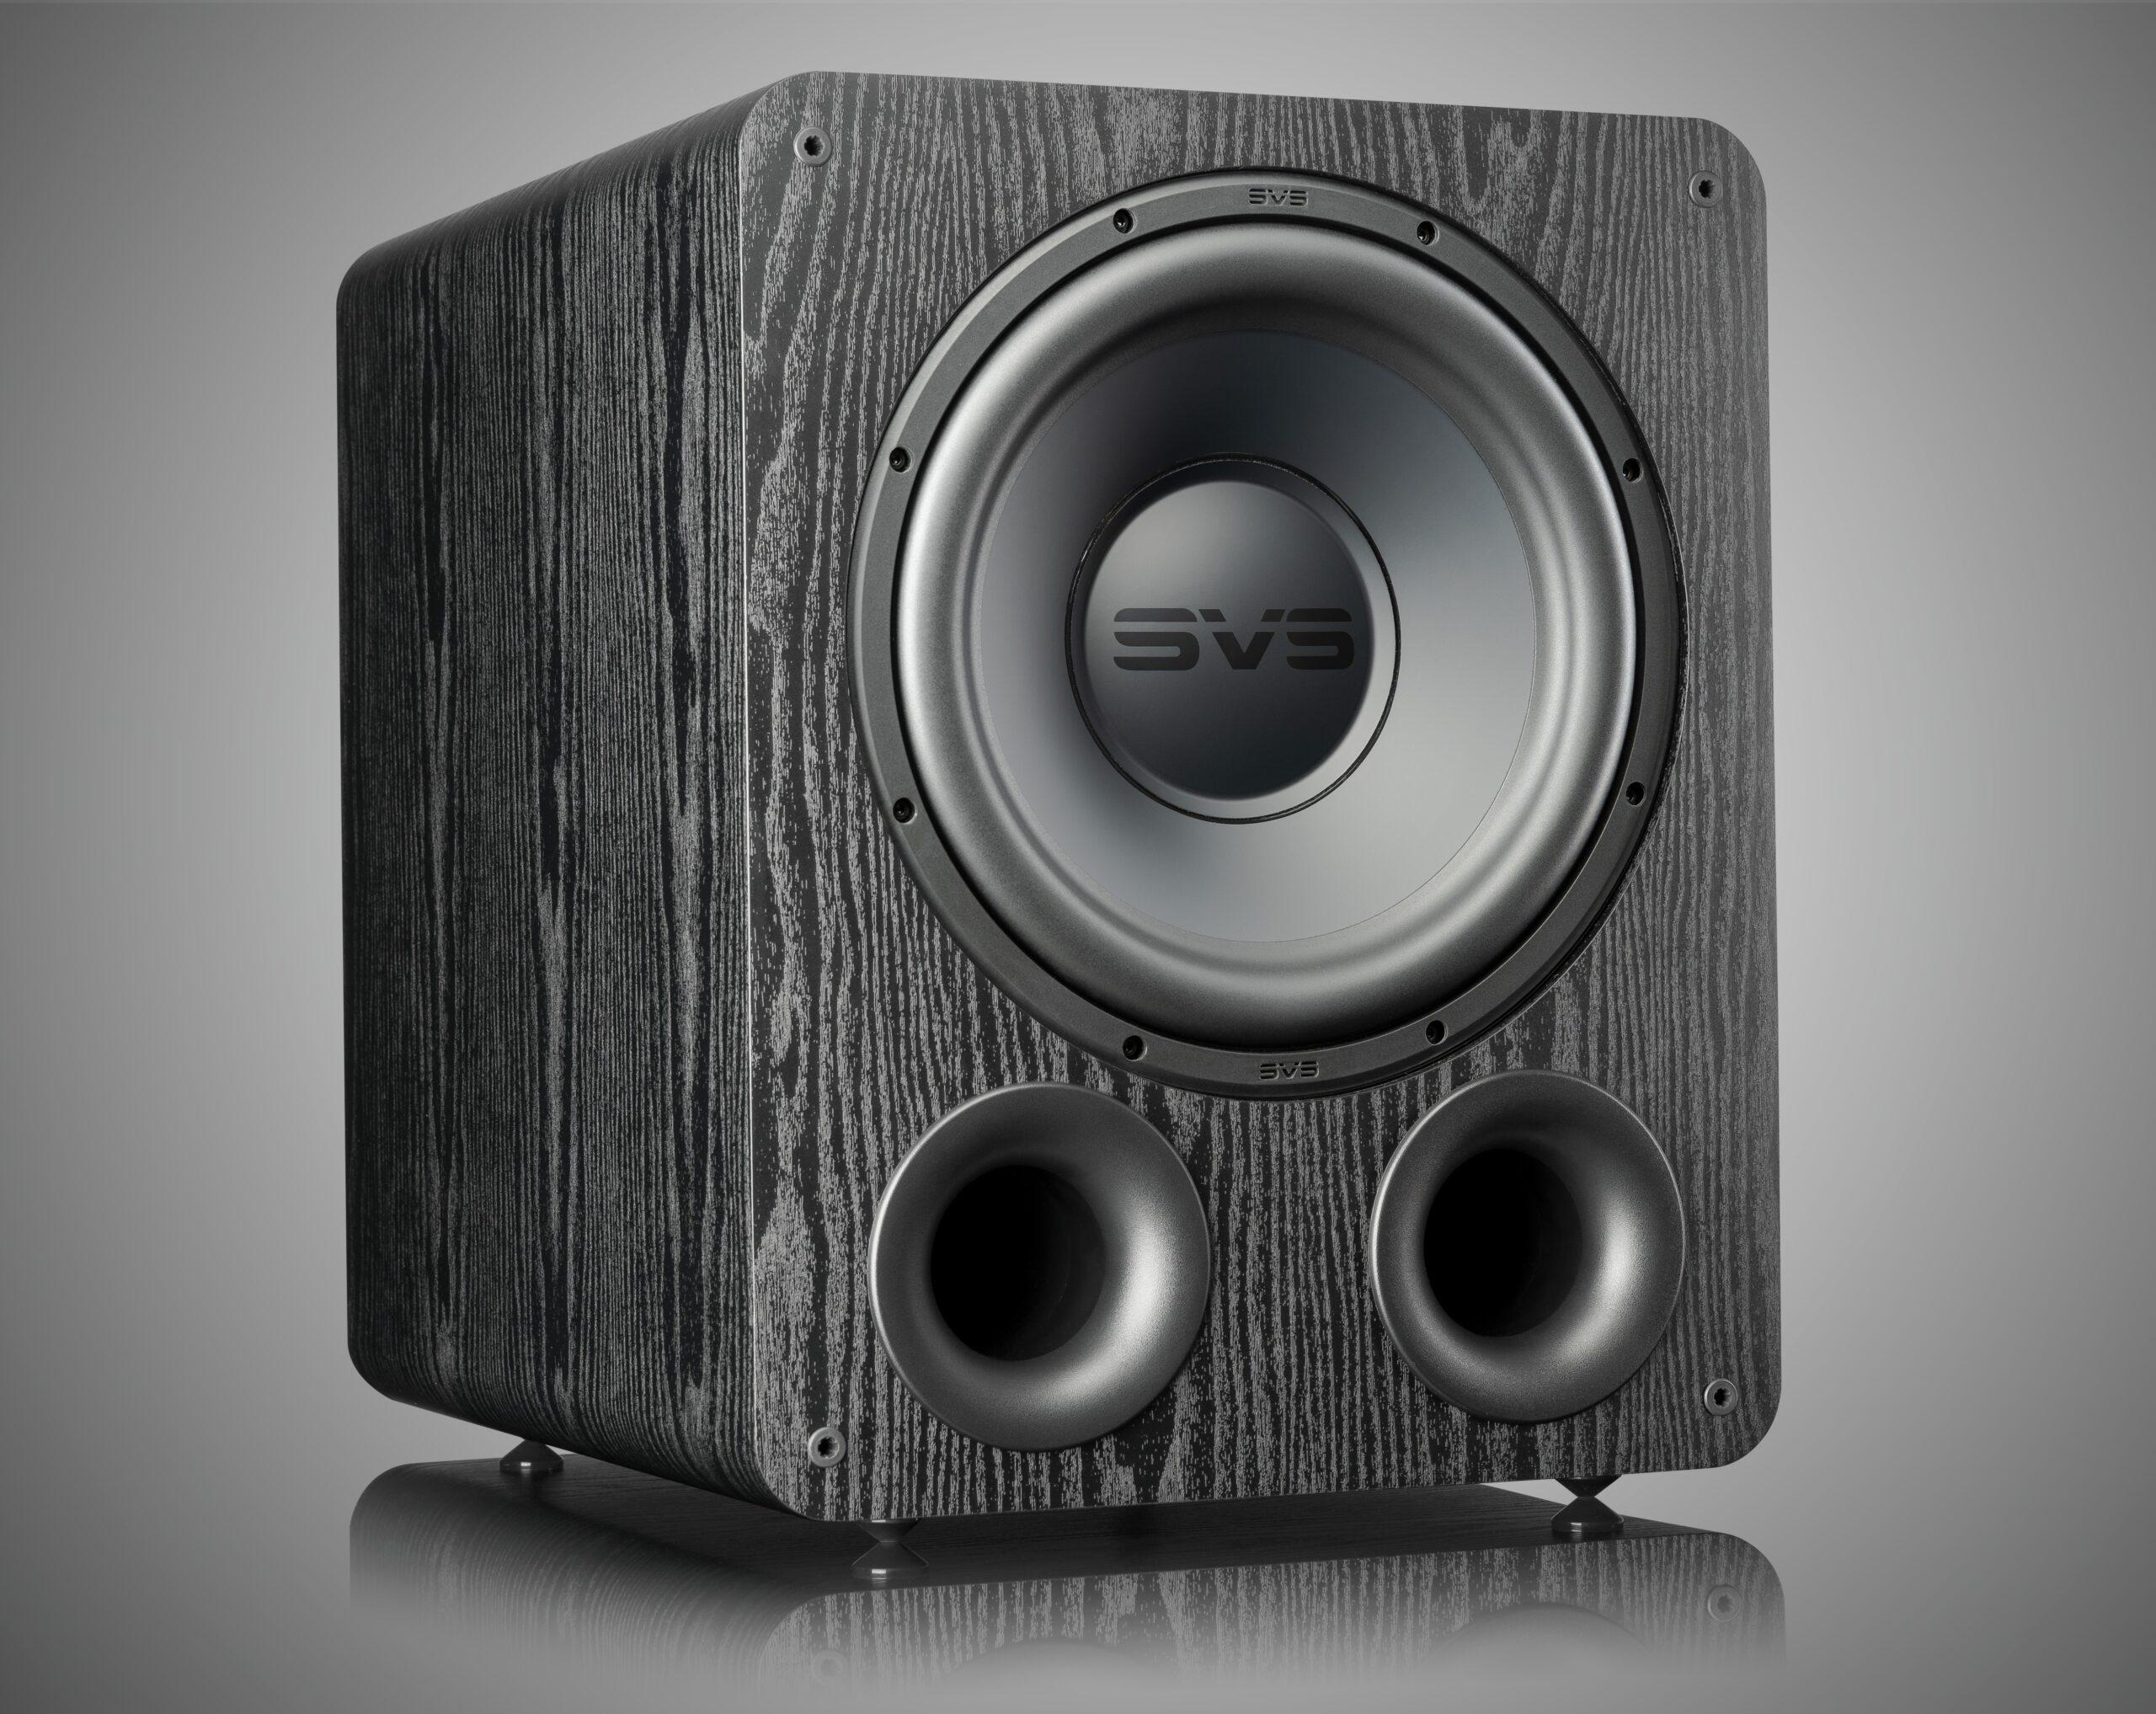 The new SVS 1000 Pro Series subwoofers deliver more powerful bass and offer more configuration options than we're accustomed to seeing at this price. SVS 68f0417e svs2 scaled